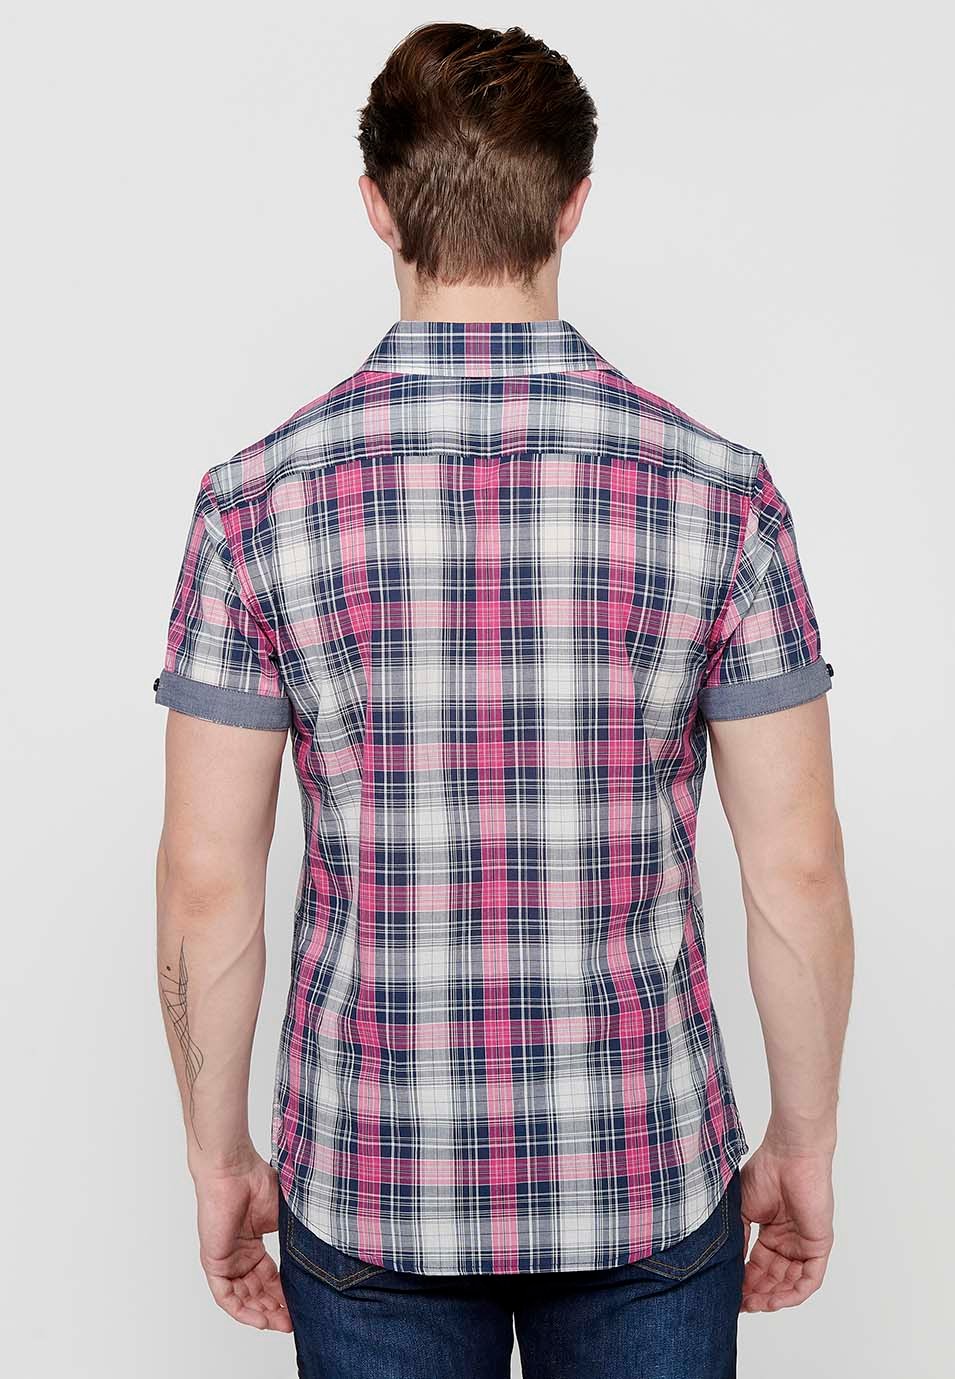 Short Sleeve Cotton Shirt with Turn-Up Finish and Button Front Closure with Front Flap Pockets and Pink Plaid Print for Men 6